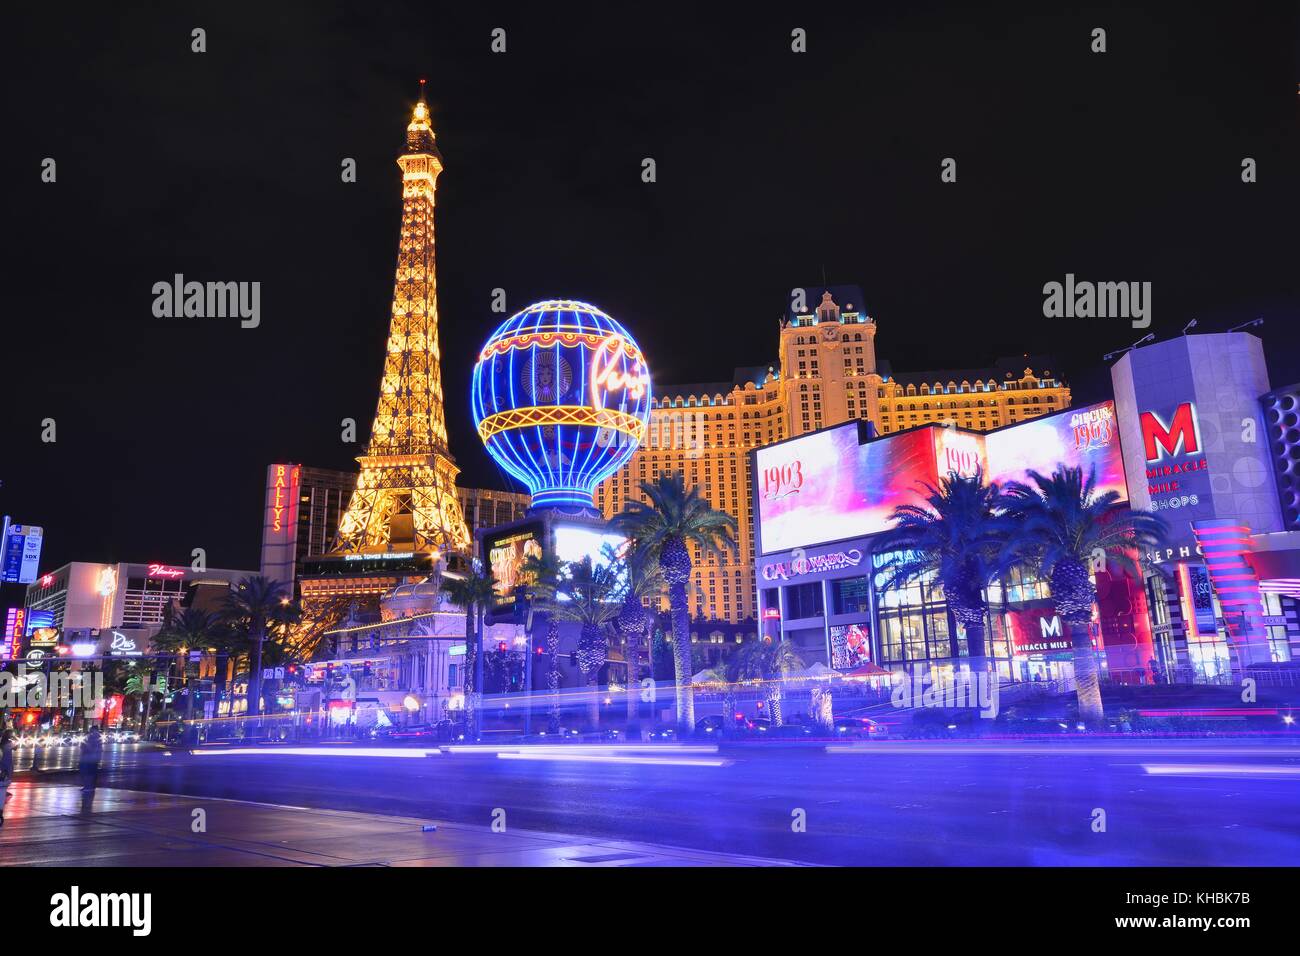 LAS VEGAS, NEVADA - JULY 25, 2017: View of the Eiffel Tower and Paris balloon of Paris Resort Casino and hotels in Las Vegas on July 25, 2017. Stock Photo